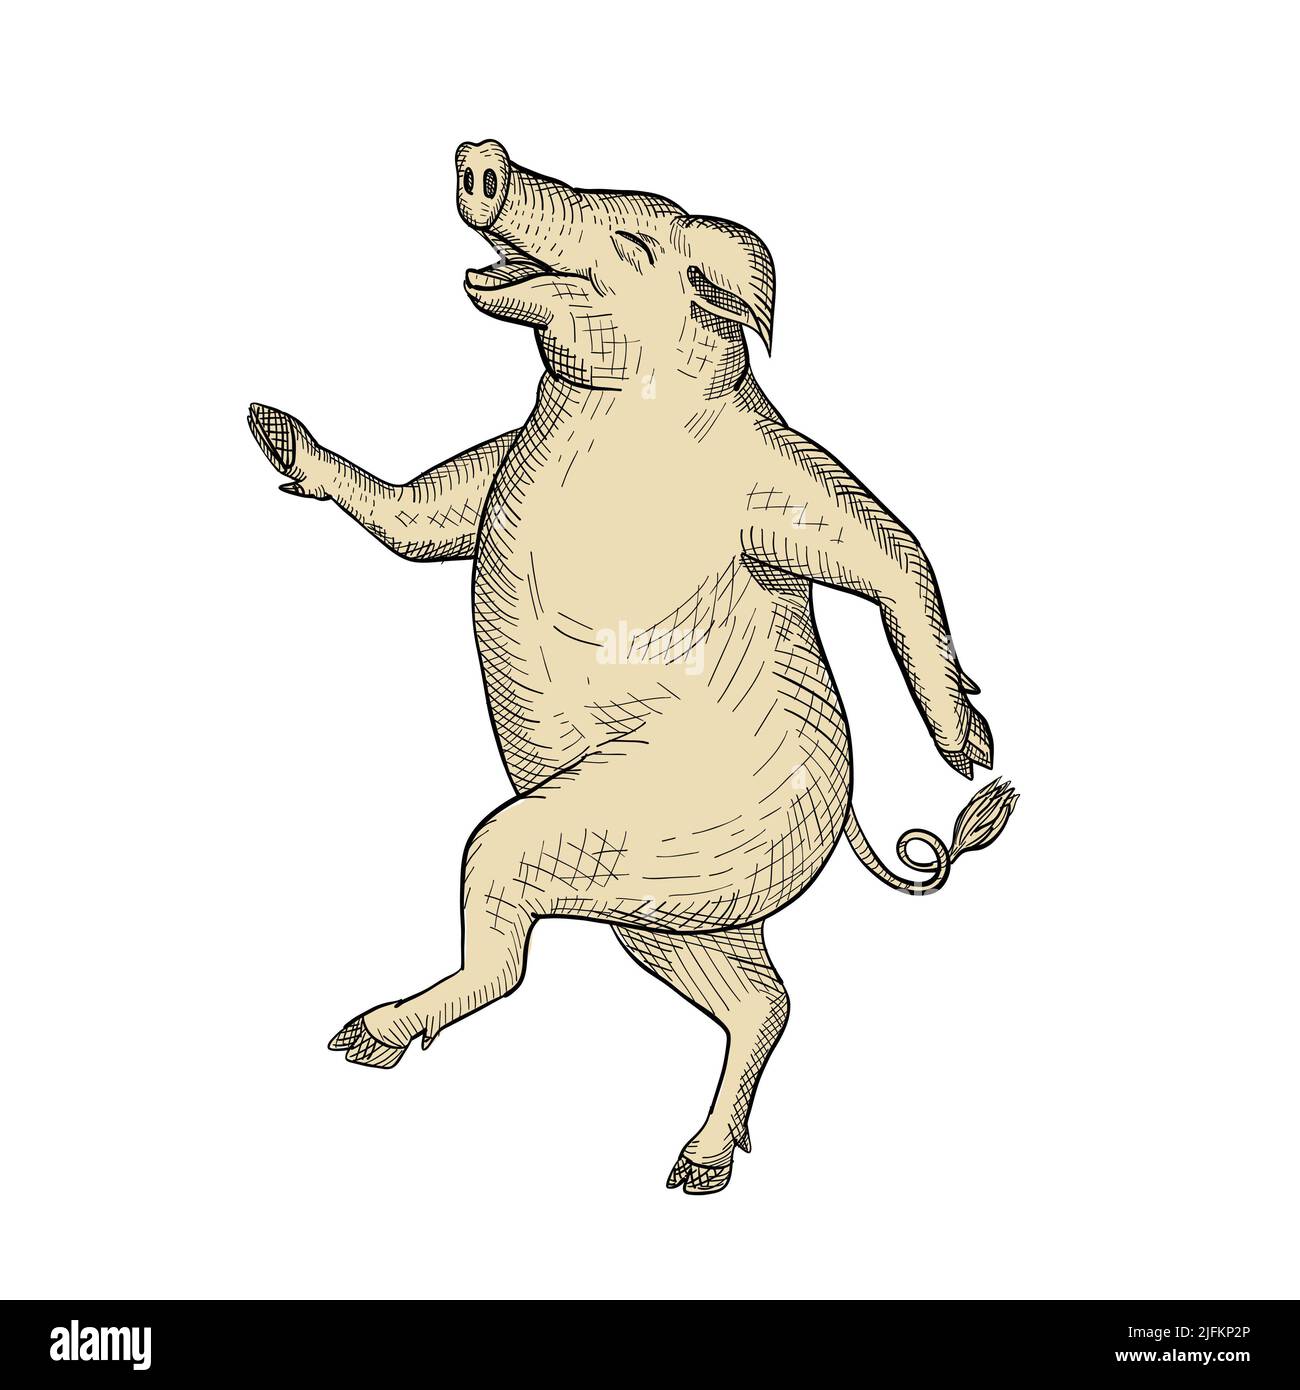 Drawing sketch style illustration of a jolly and happy pig dancing, walking or taking a stride viewed from side on isolated white background. Stock Photo